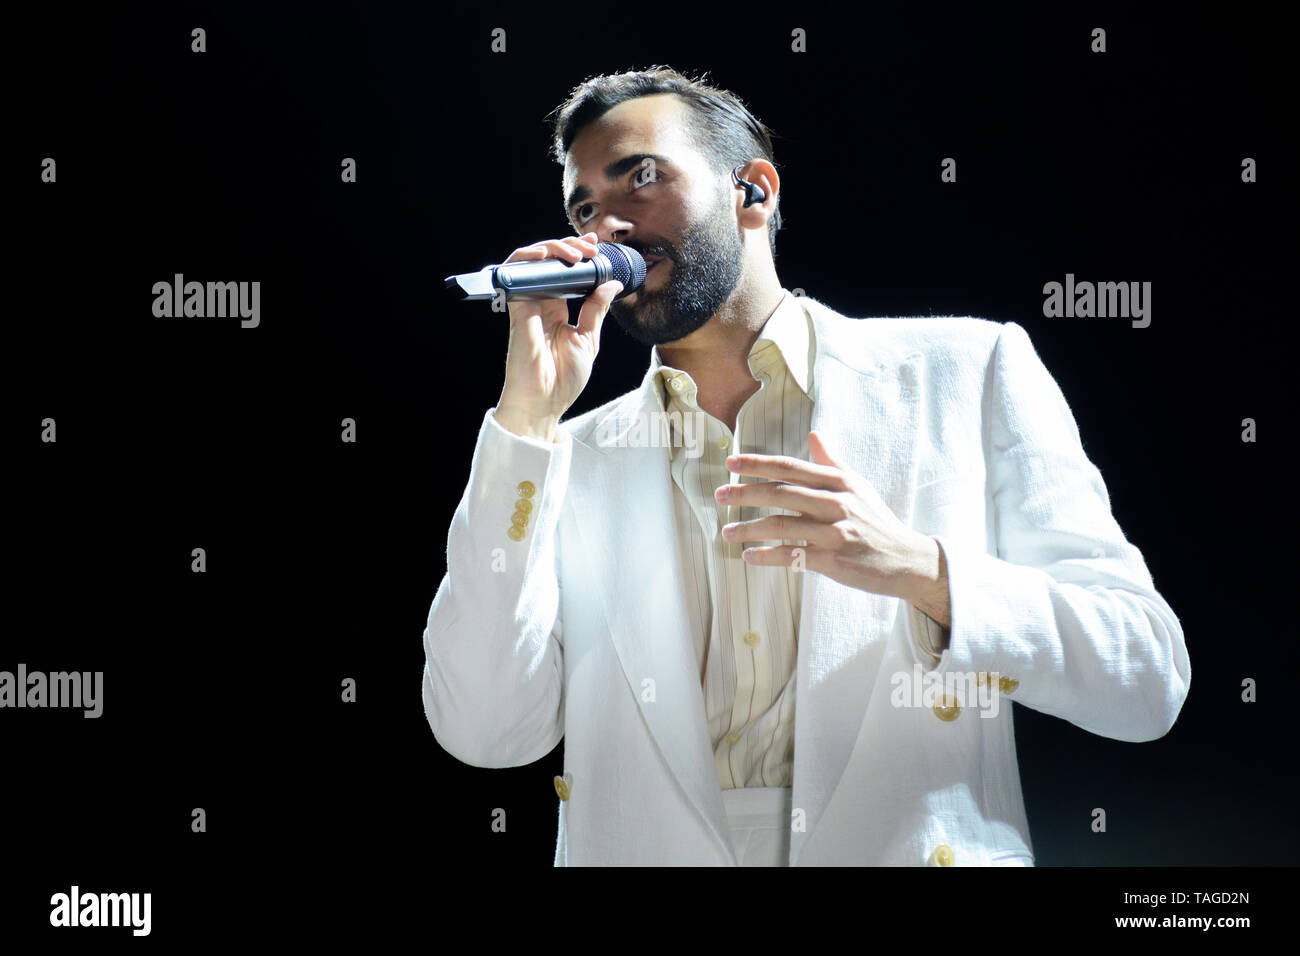 Verona, Italy. 24nd May, 2019. Italian famous singer-songwriter Marco Mengoni performs live with his Atlantico Tour 2019 in Arena of Verona, Italy. Stock Photo